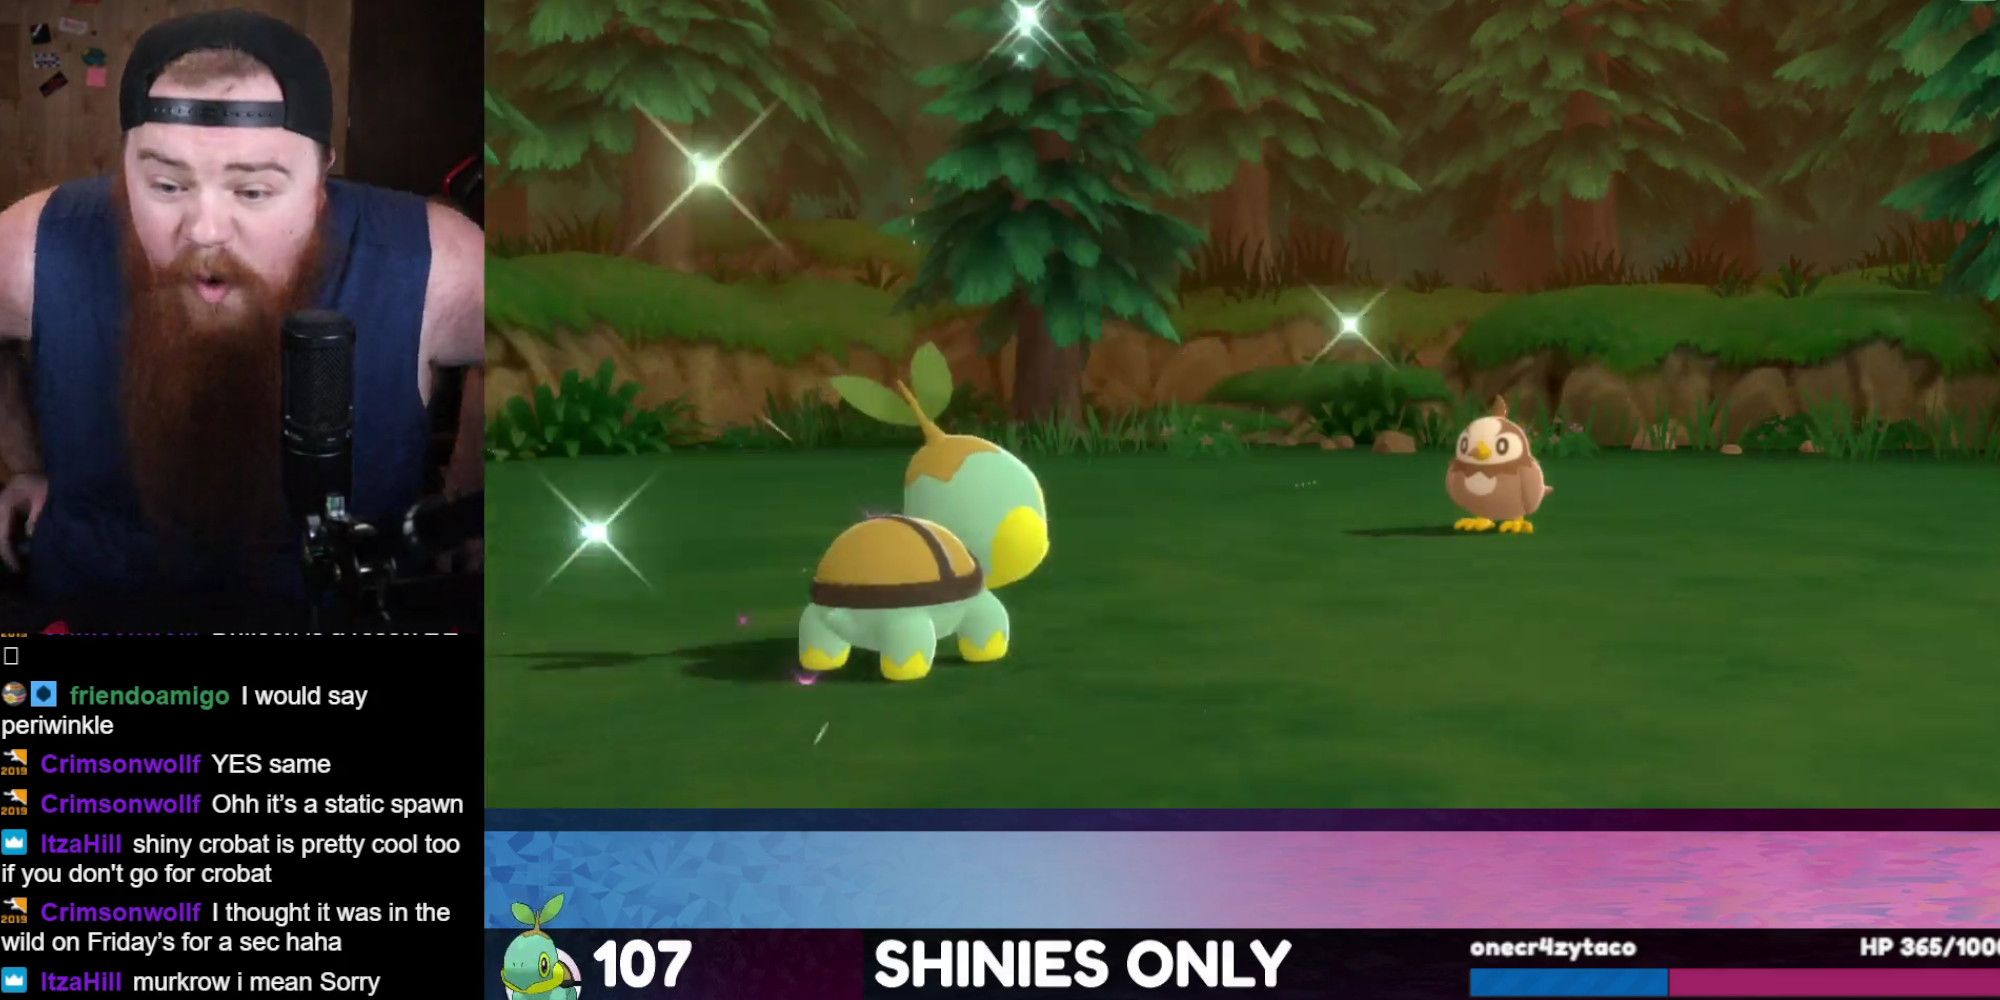 MitchOG jumps out of his chair in excitment at seeing a double shiny Starly and Turtwig